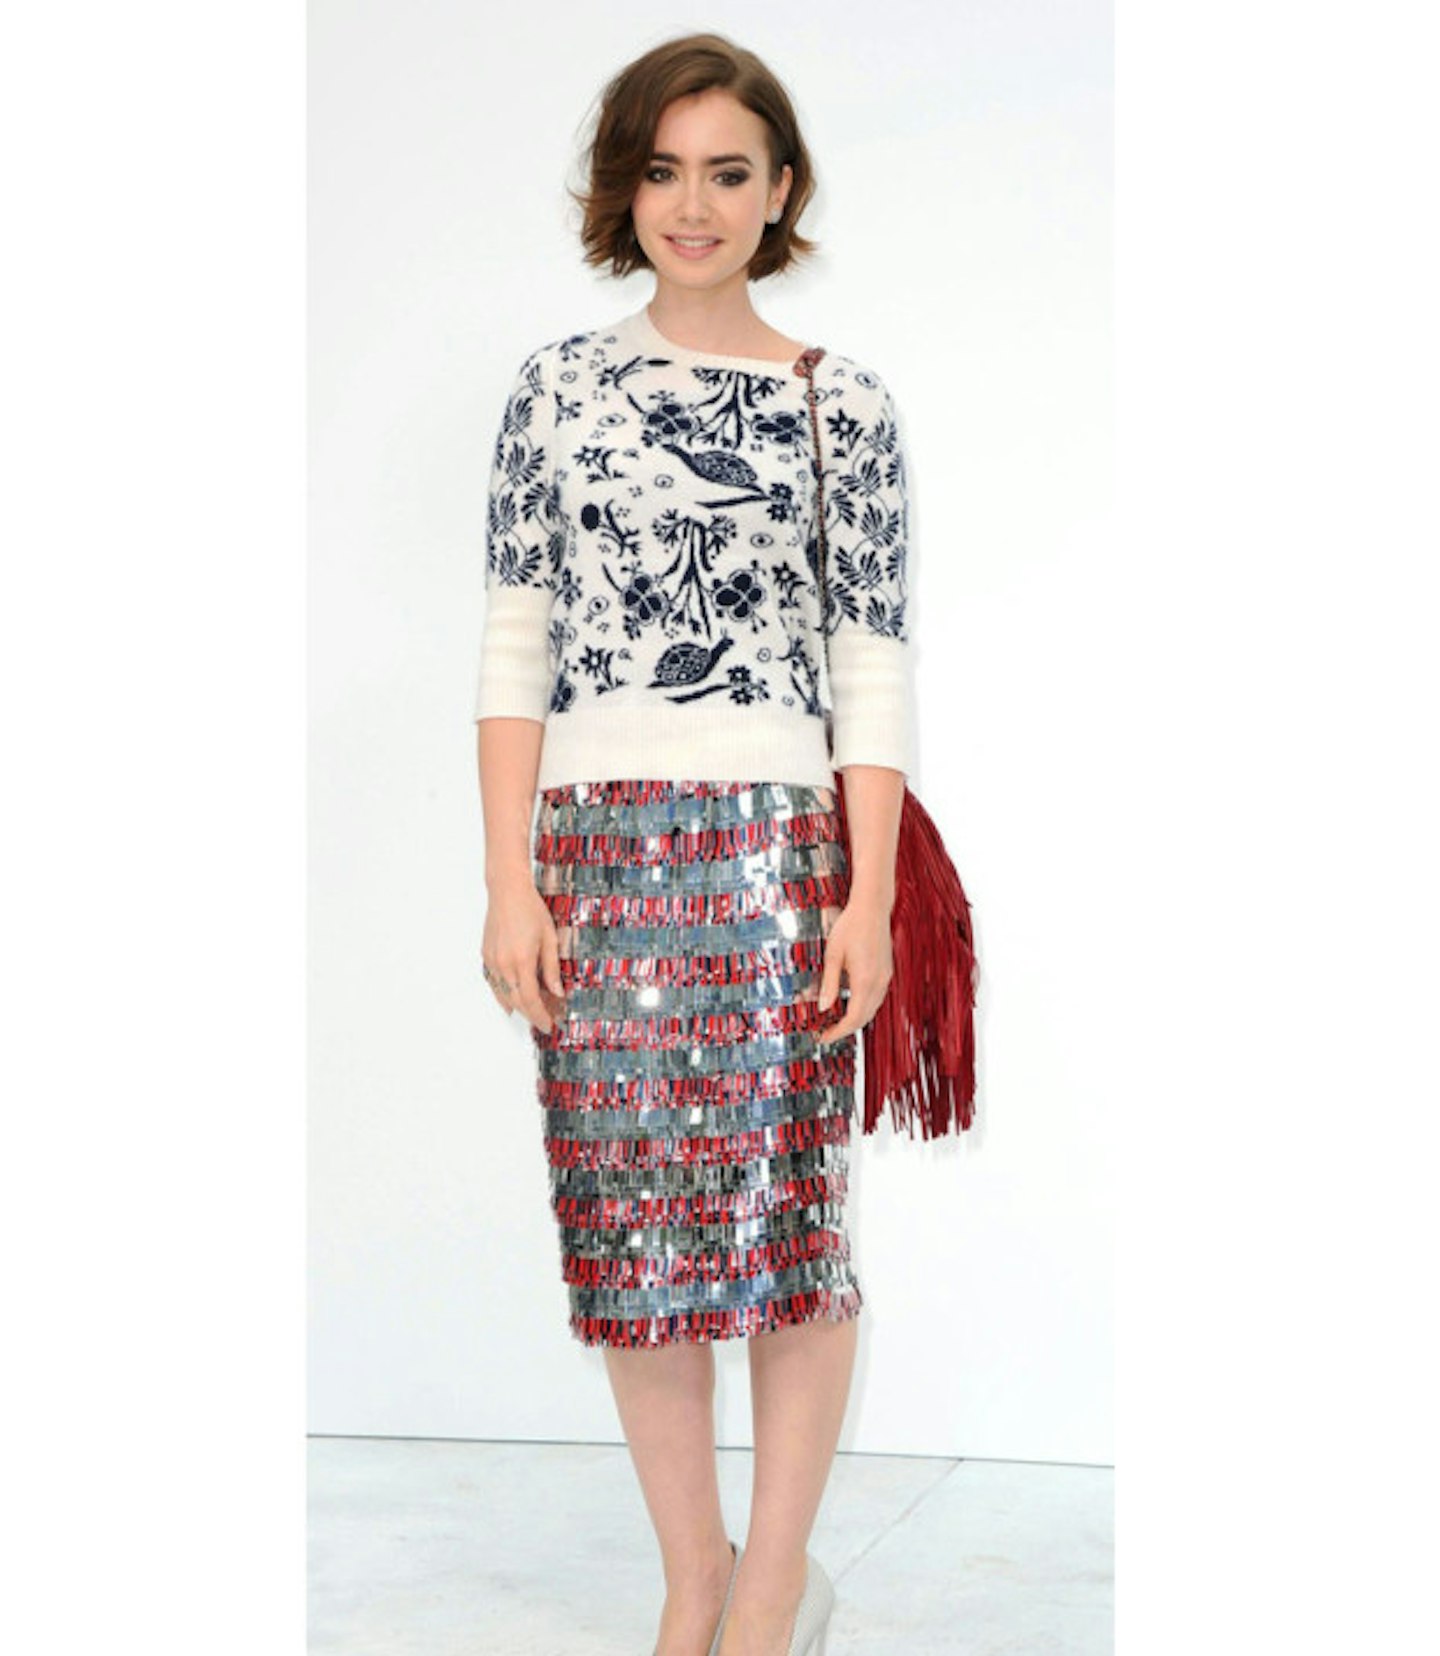 lily-collins-chanel-couture-show-aw-14-fringe-sequin-skirt-floral-jumper